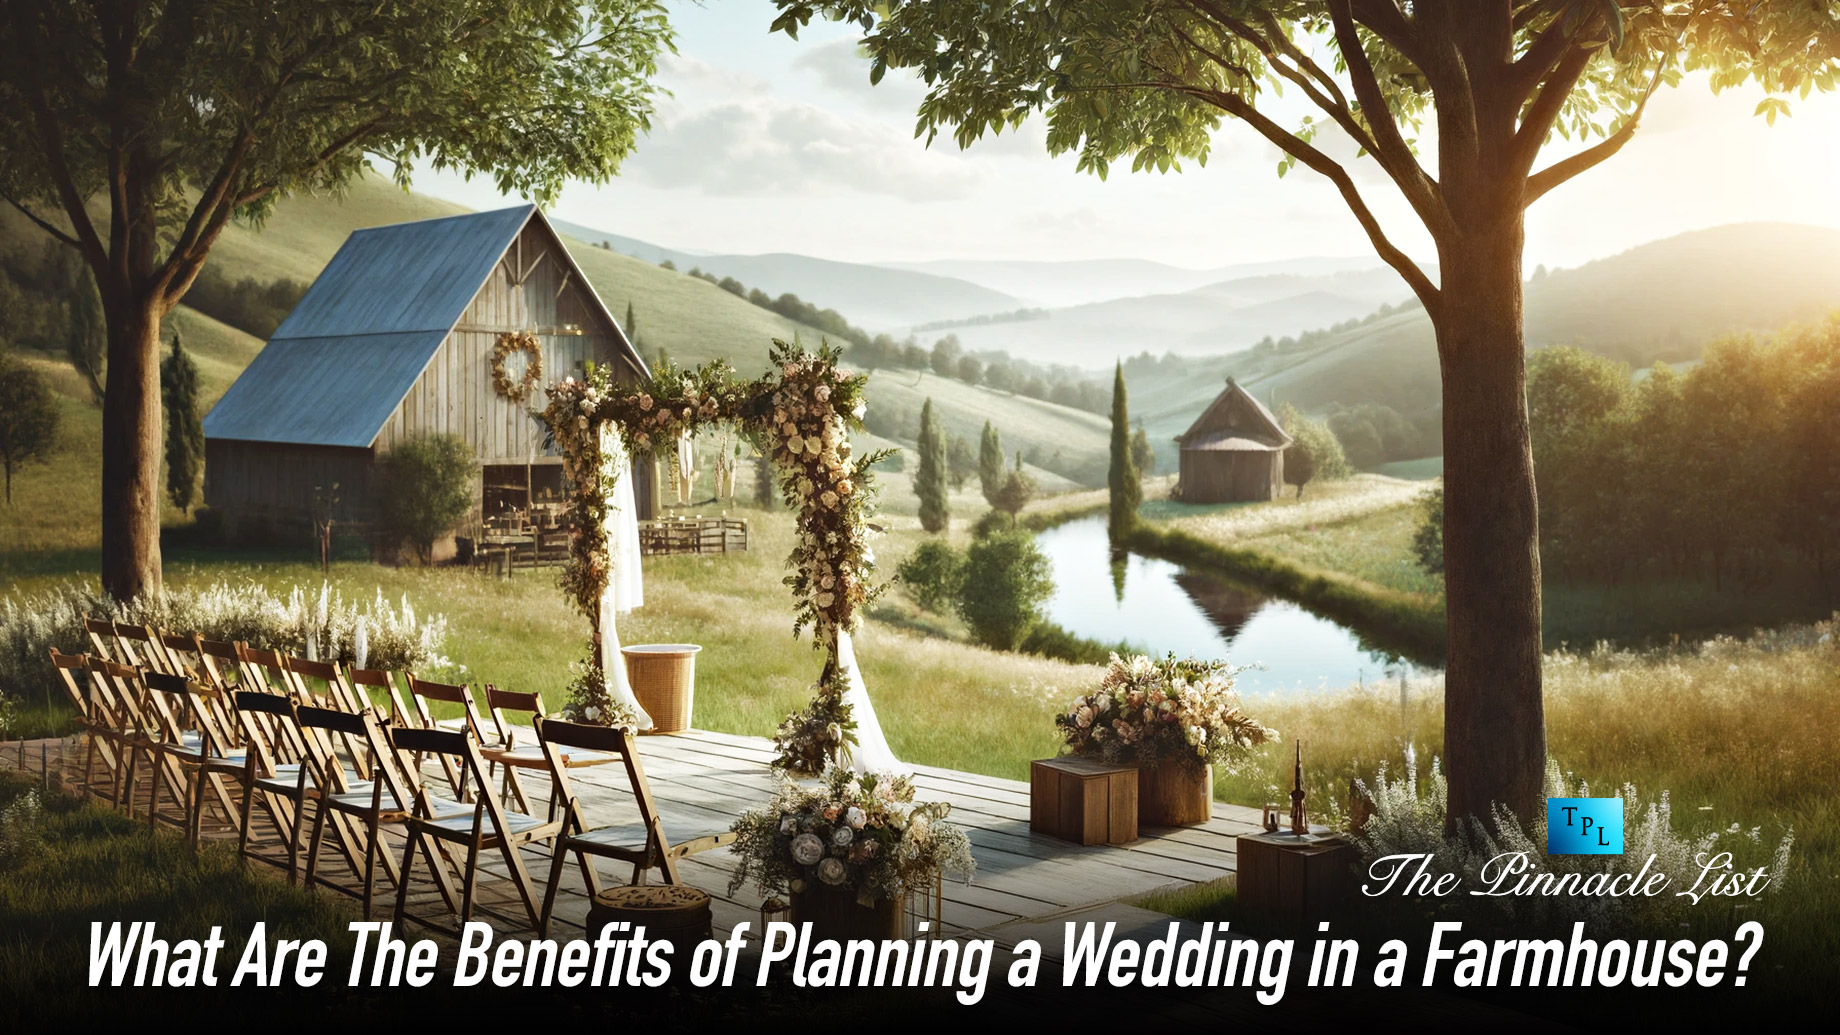 What Are The Benefits of Planning a Wedding in a Farmhouse?